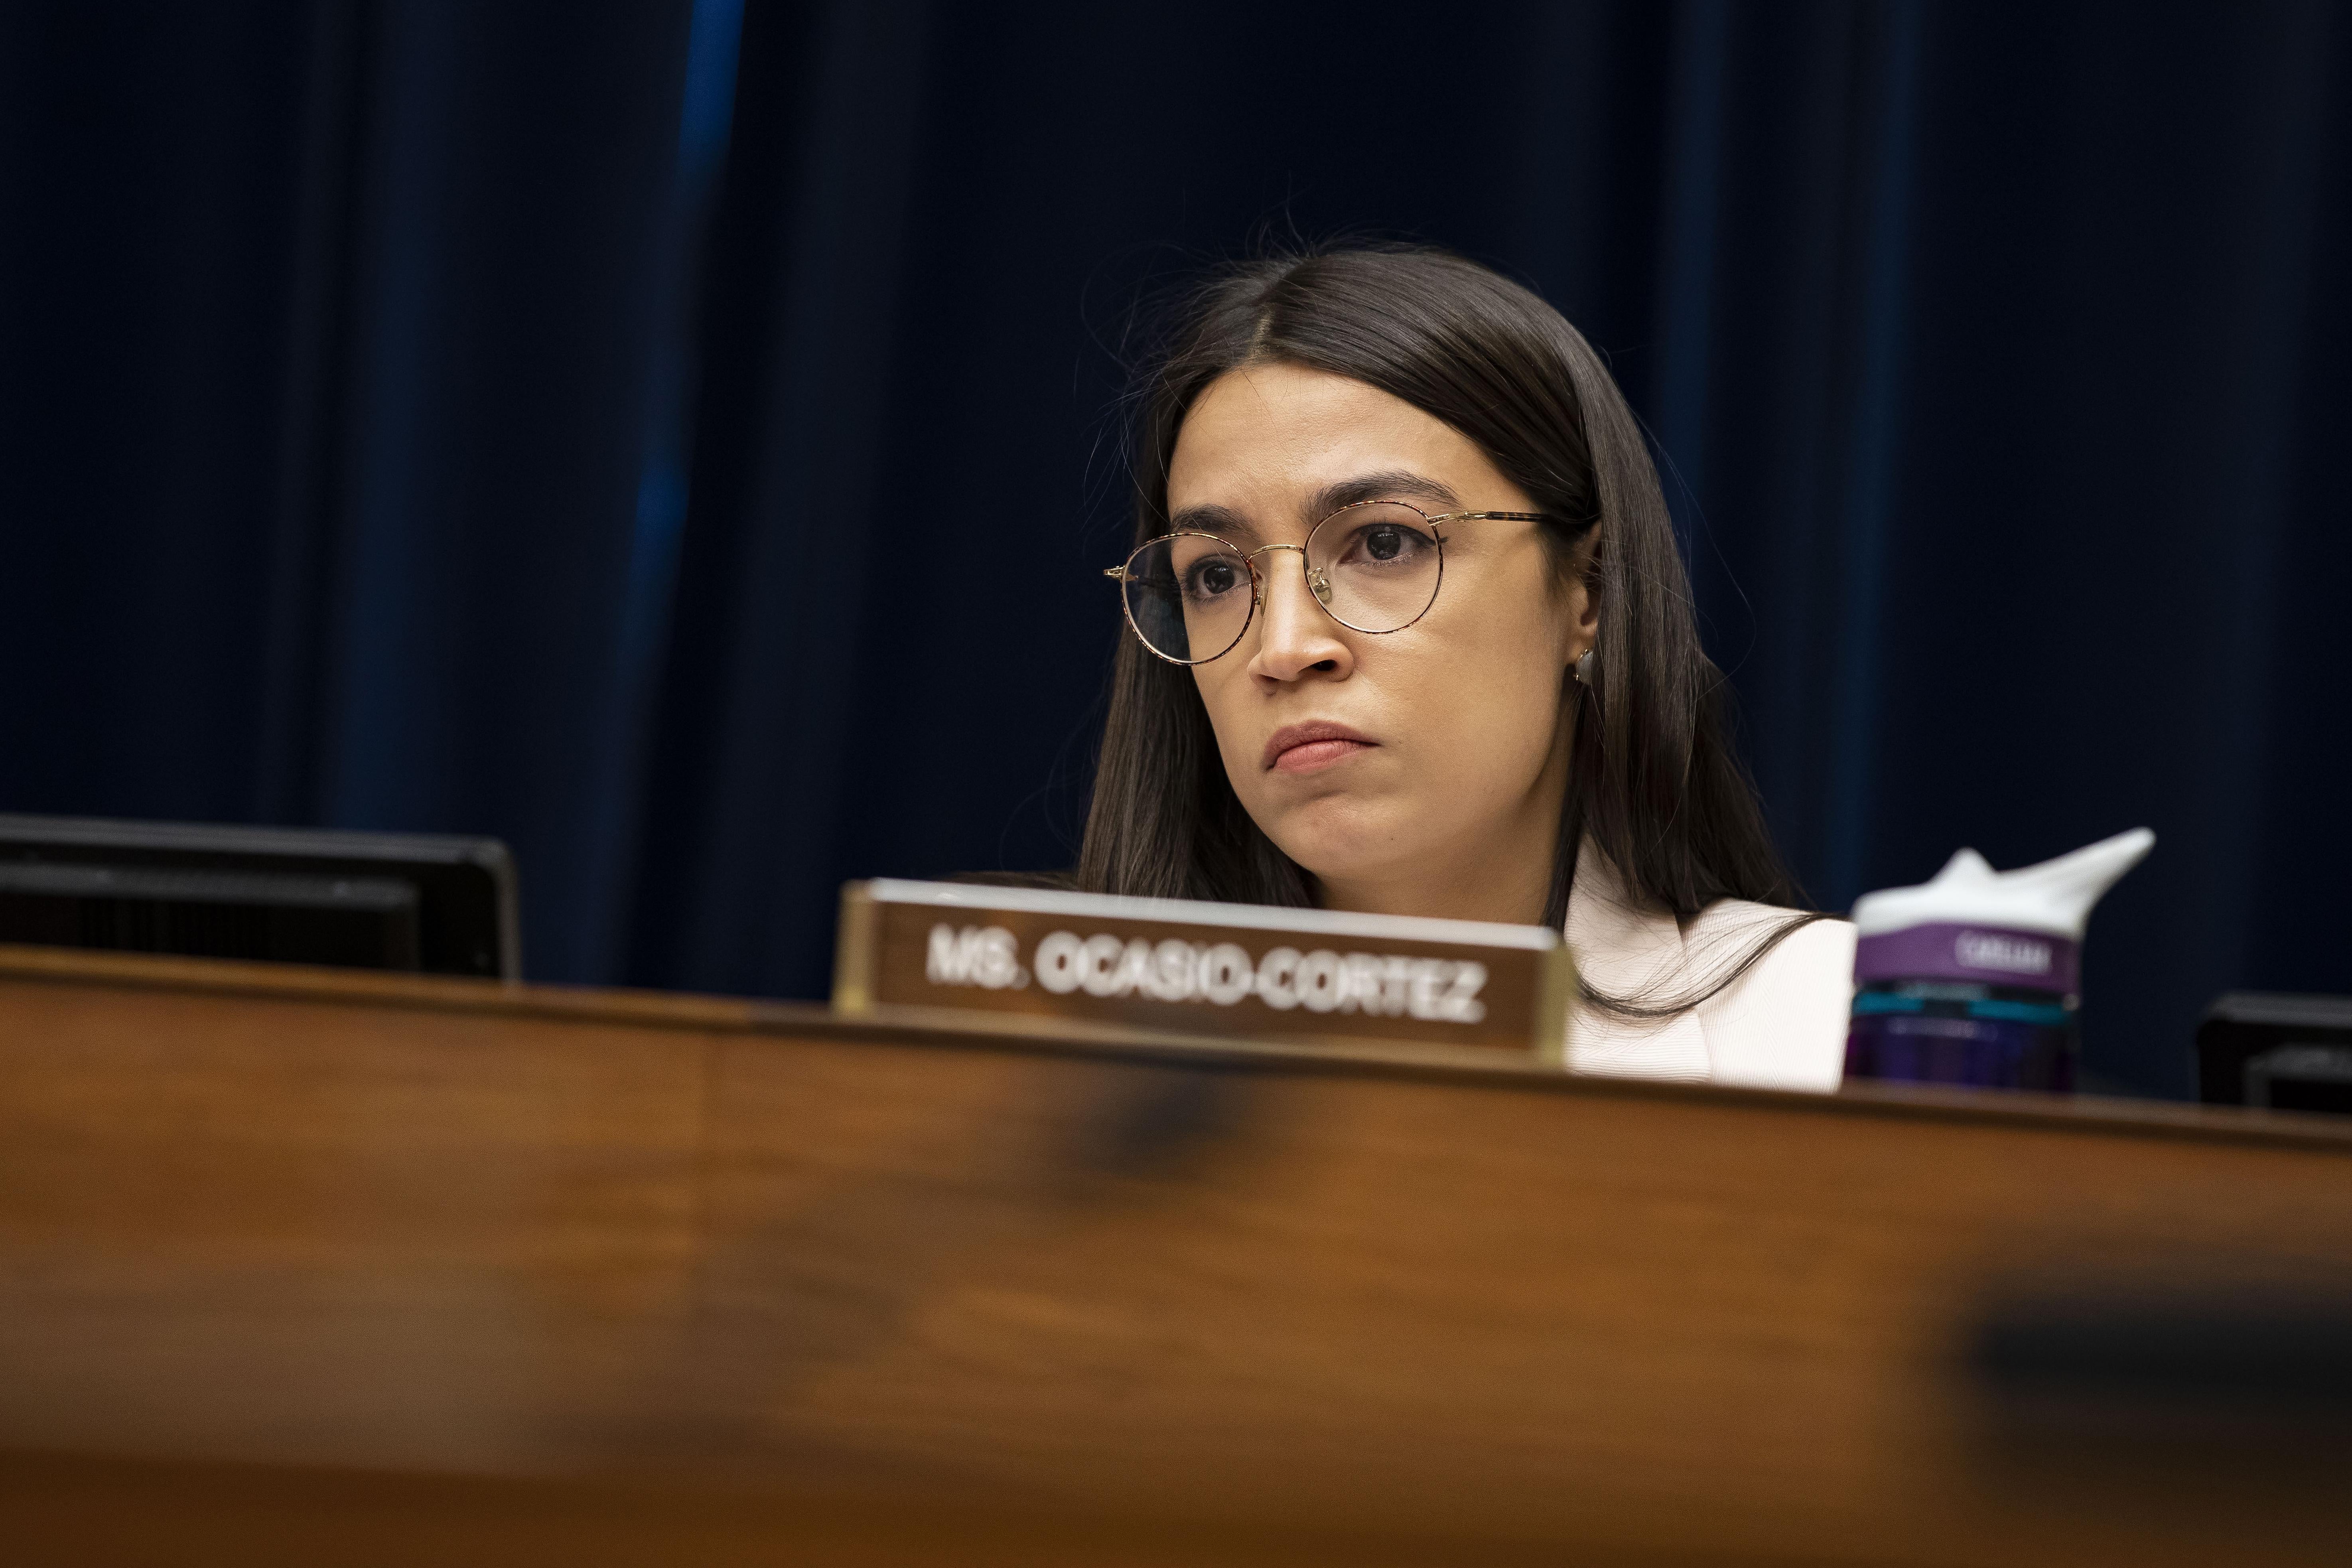 Rep. Alexandria Ocasio-Cortez listens during a House Civil Rights and Civil Liberties Subcommittee hearing on confronting white supremacy at the U.S. Capitol on May 15, 2019 in Washington, D.C. 